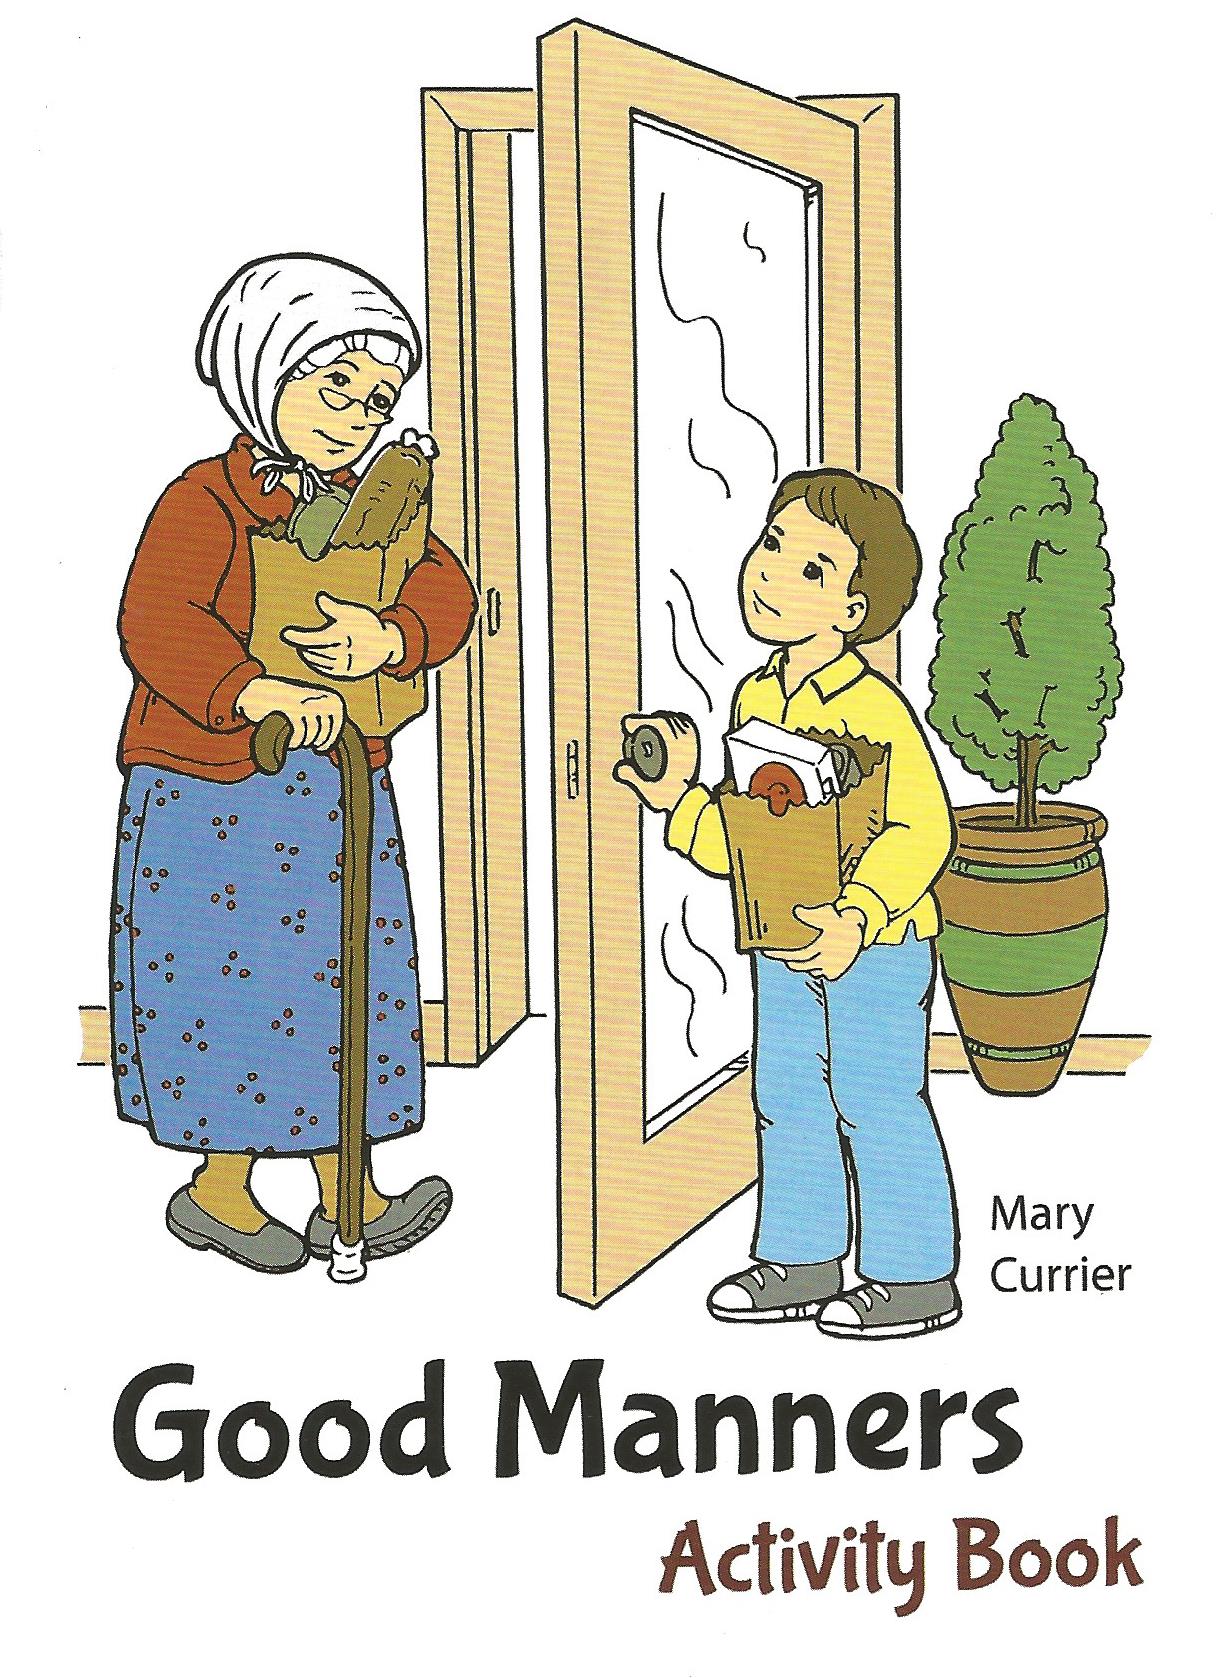 GOOD MANNERS MINI ACTIVITY BOOK Mary Currier